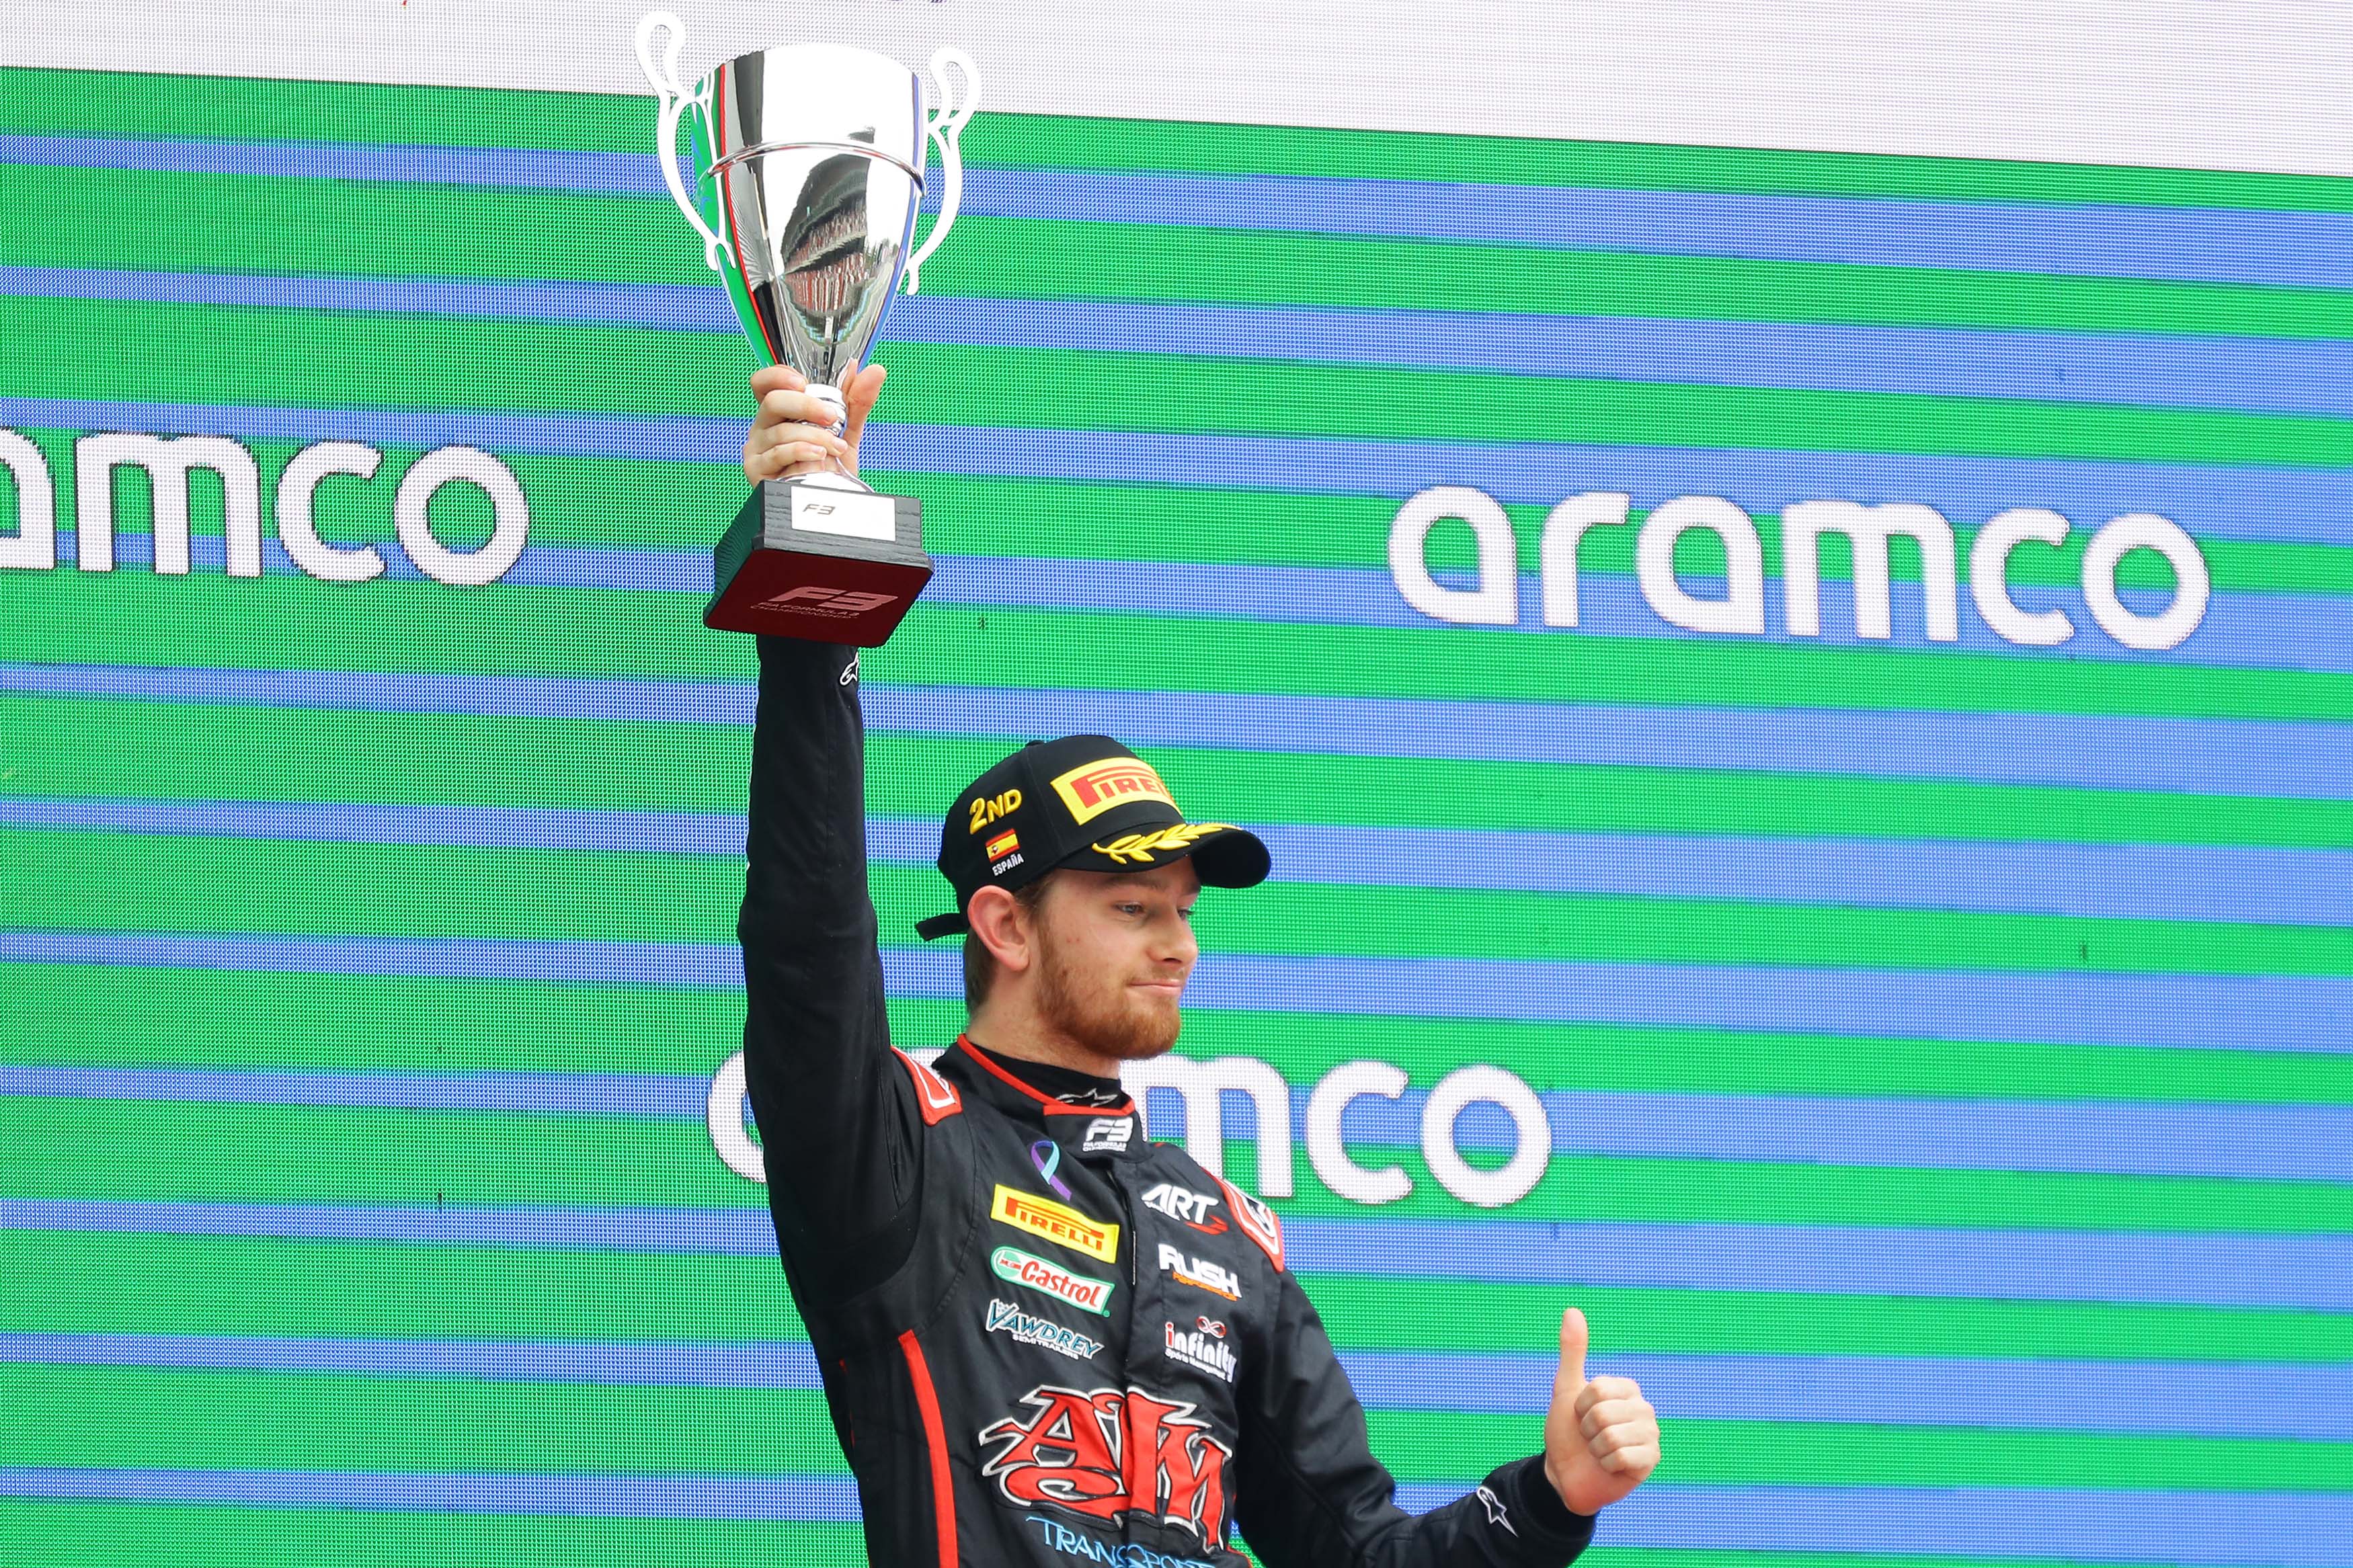 A positive weekend in Barcelona for...